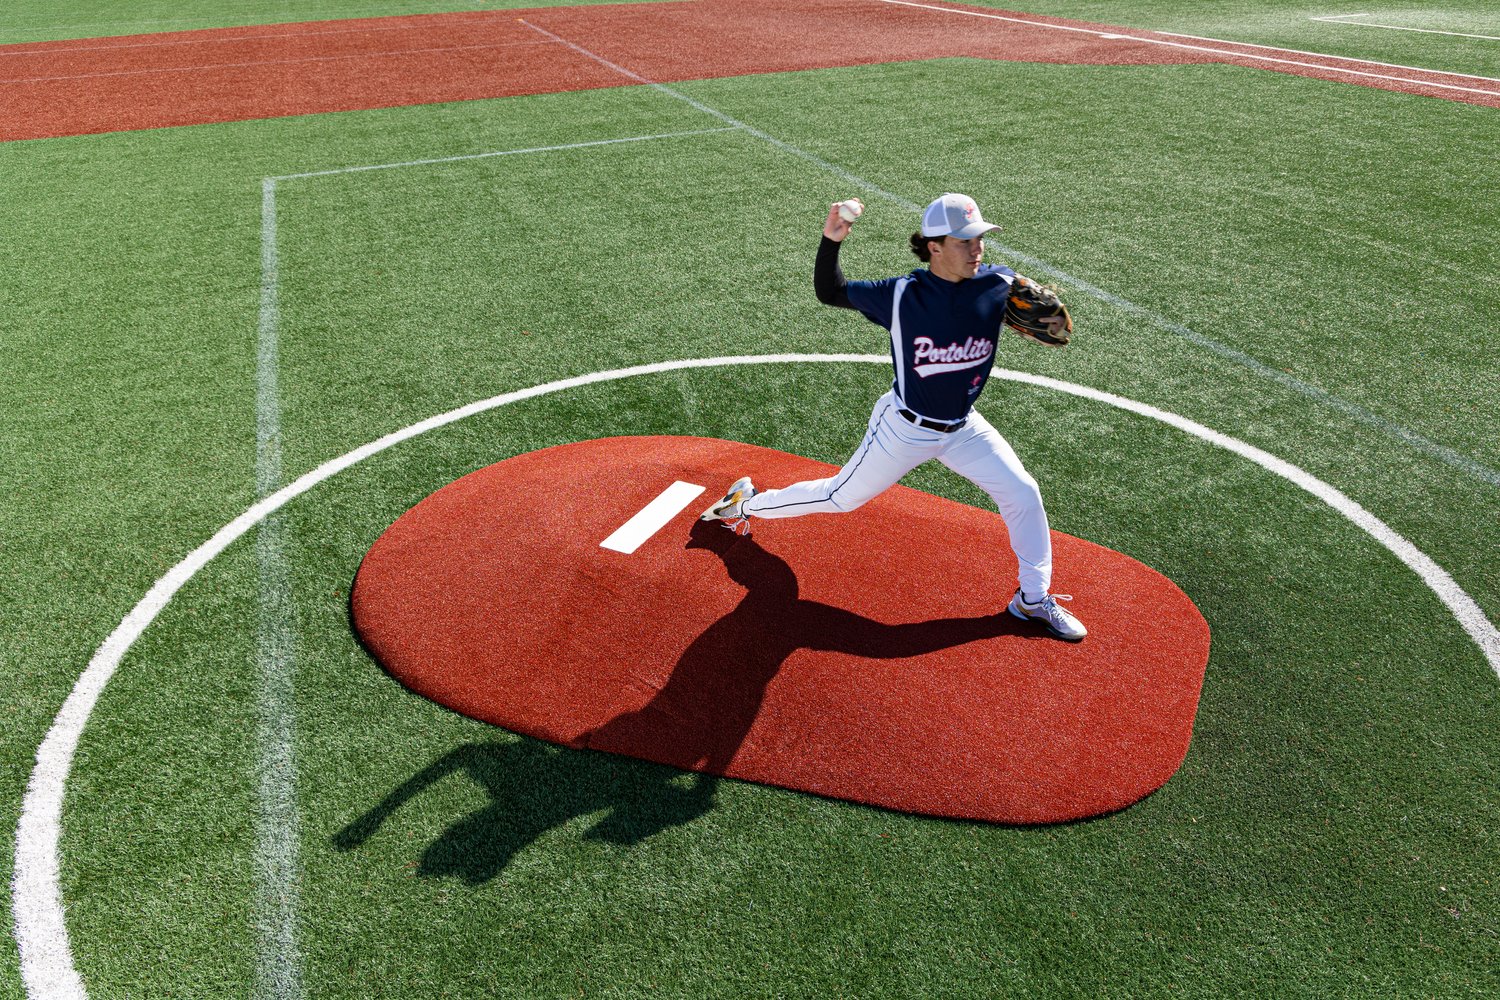 10" Two-Piece Game Mound